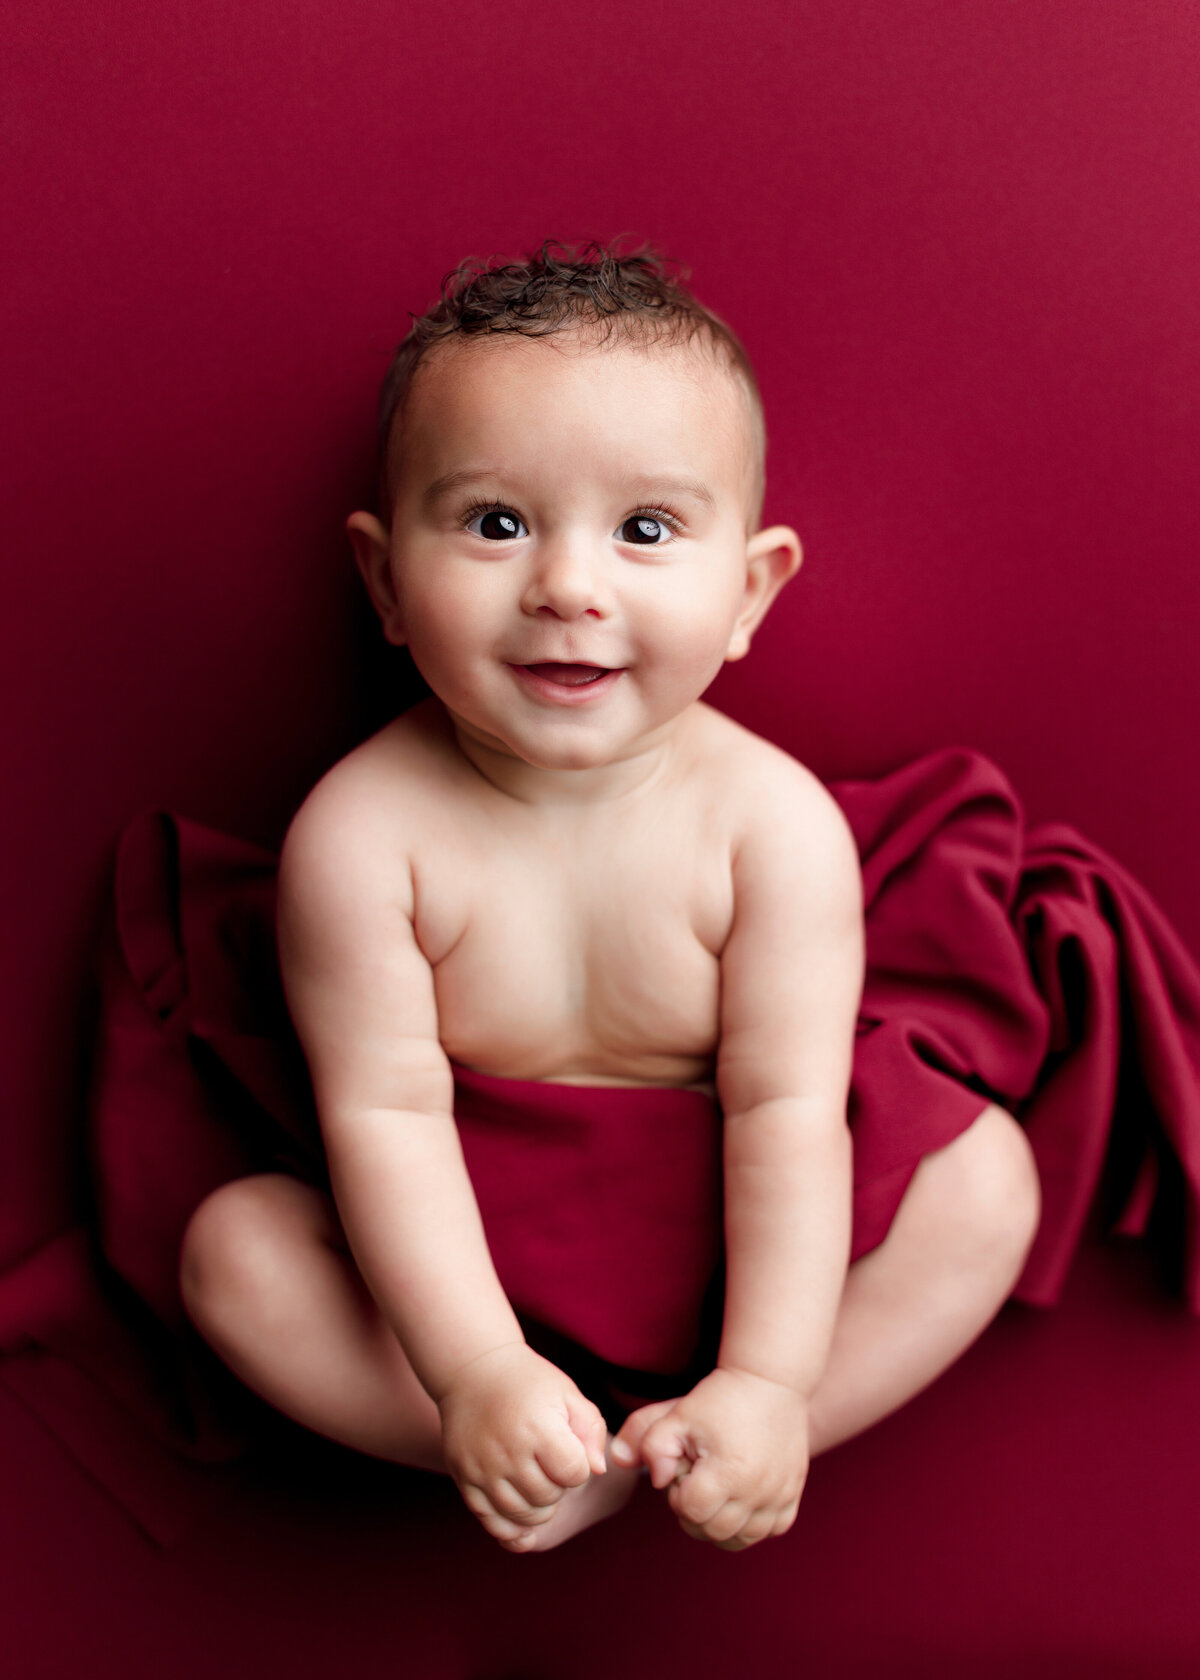 6-month milestone baby photos at top West Palm Beach and Wellington, FL photographer. Aerial image. Baby boy is bare and draped in red fabric against a red backdrop. Baby is holding his toes and smiling at the camera.